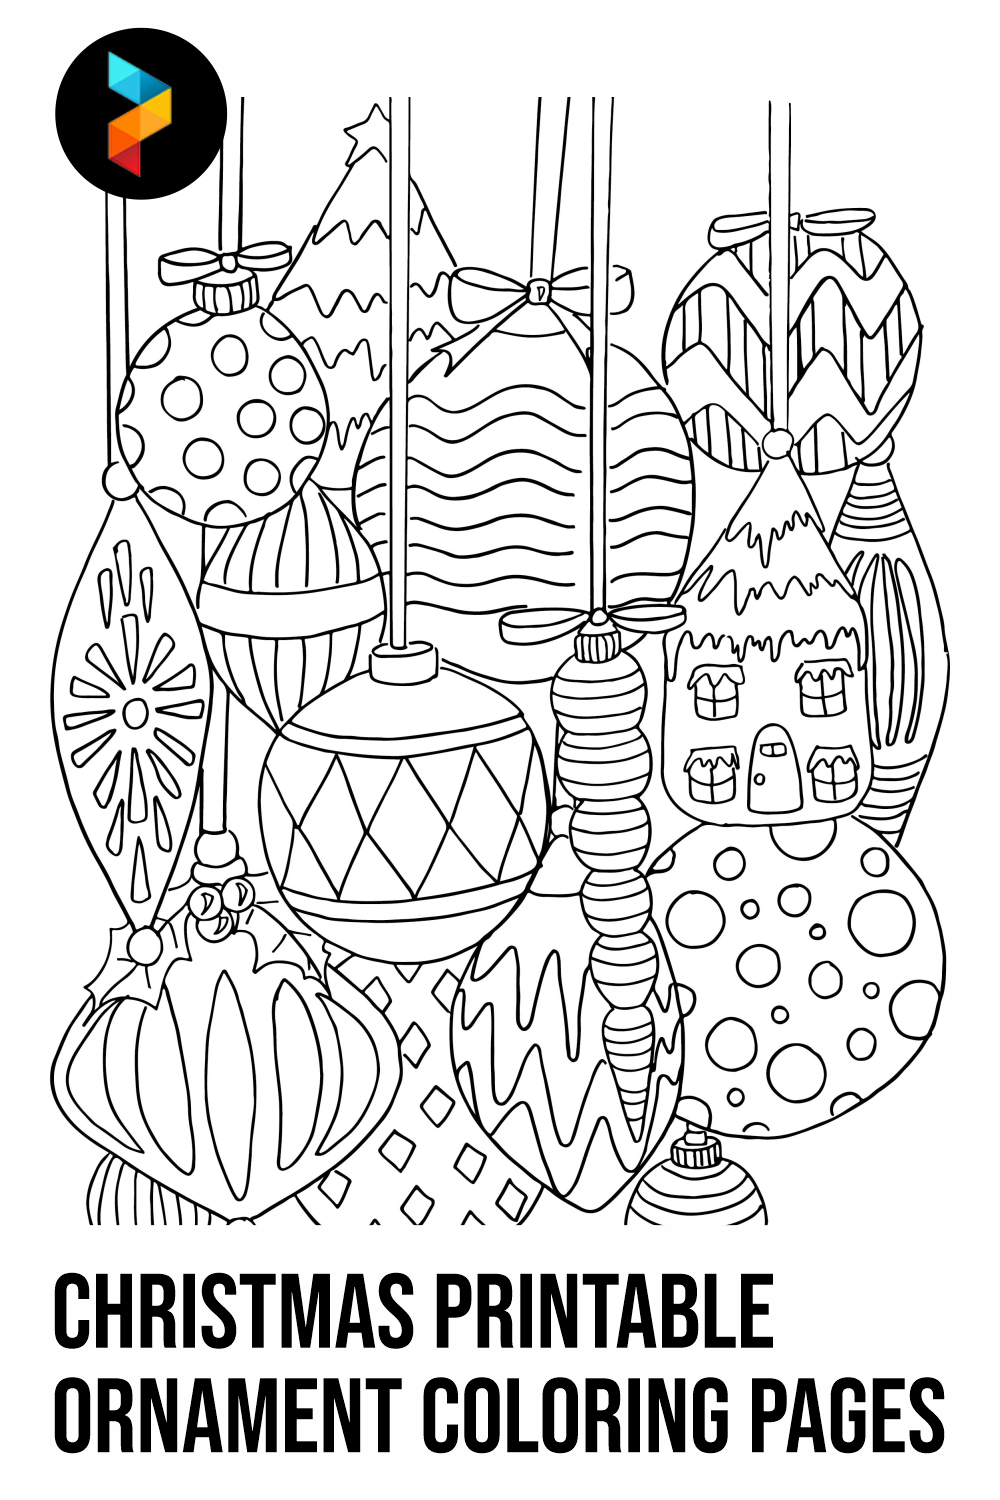 Christmas Printable Ornament Coloring Pages